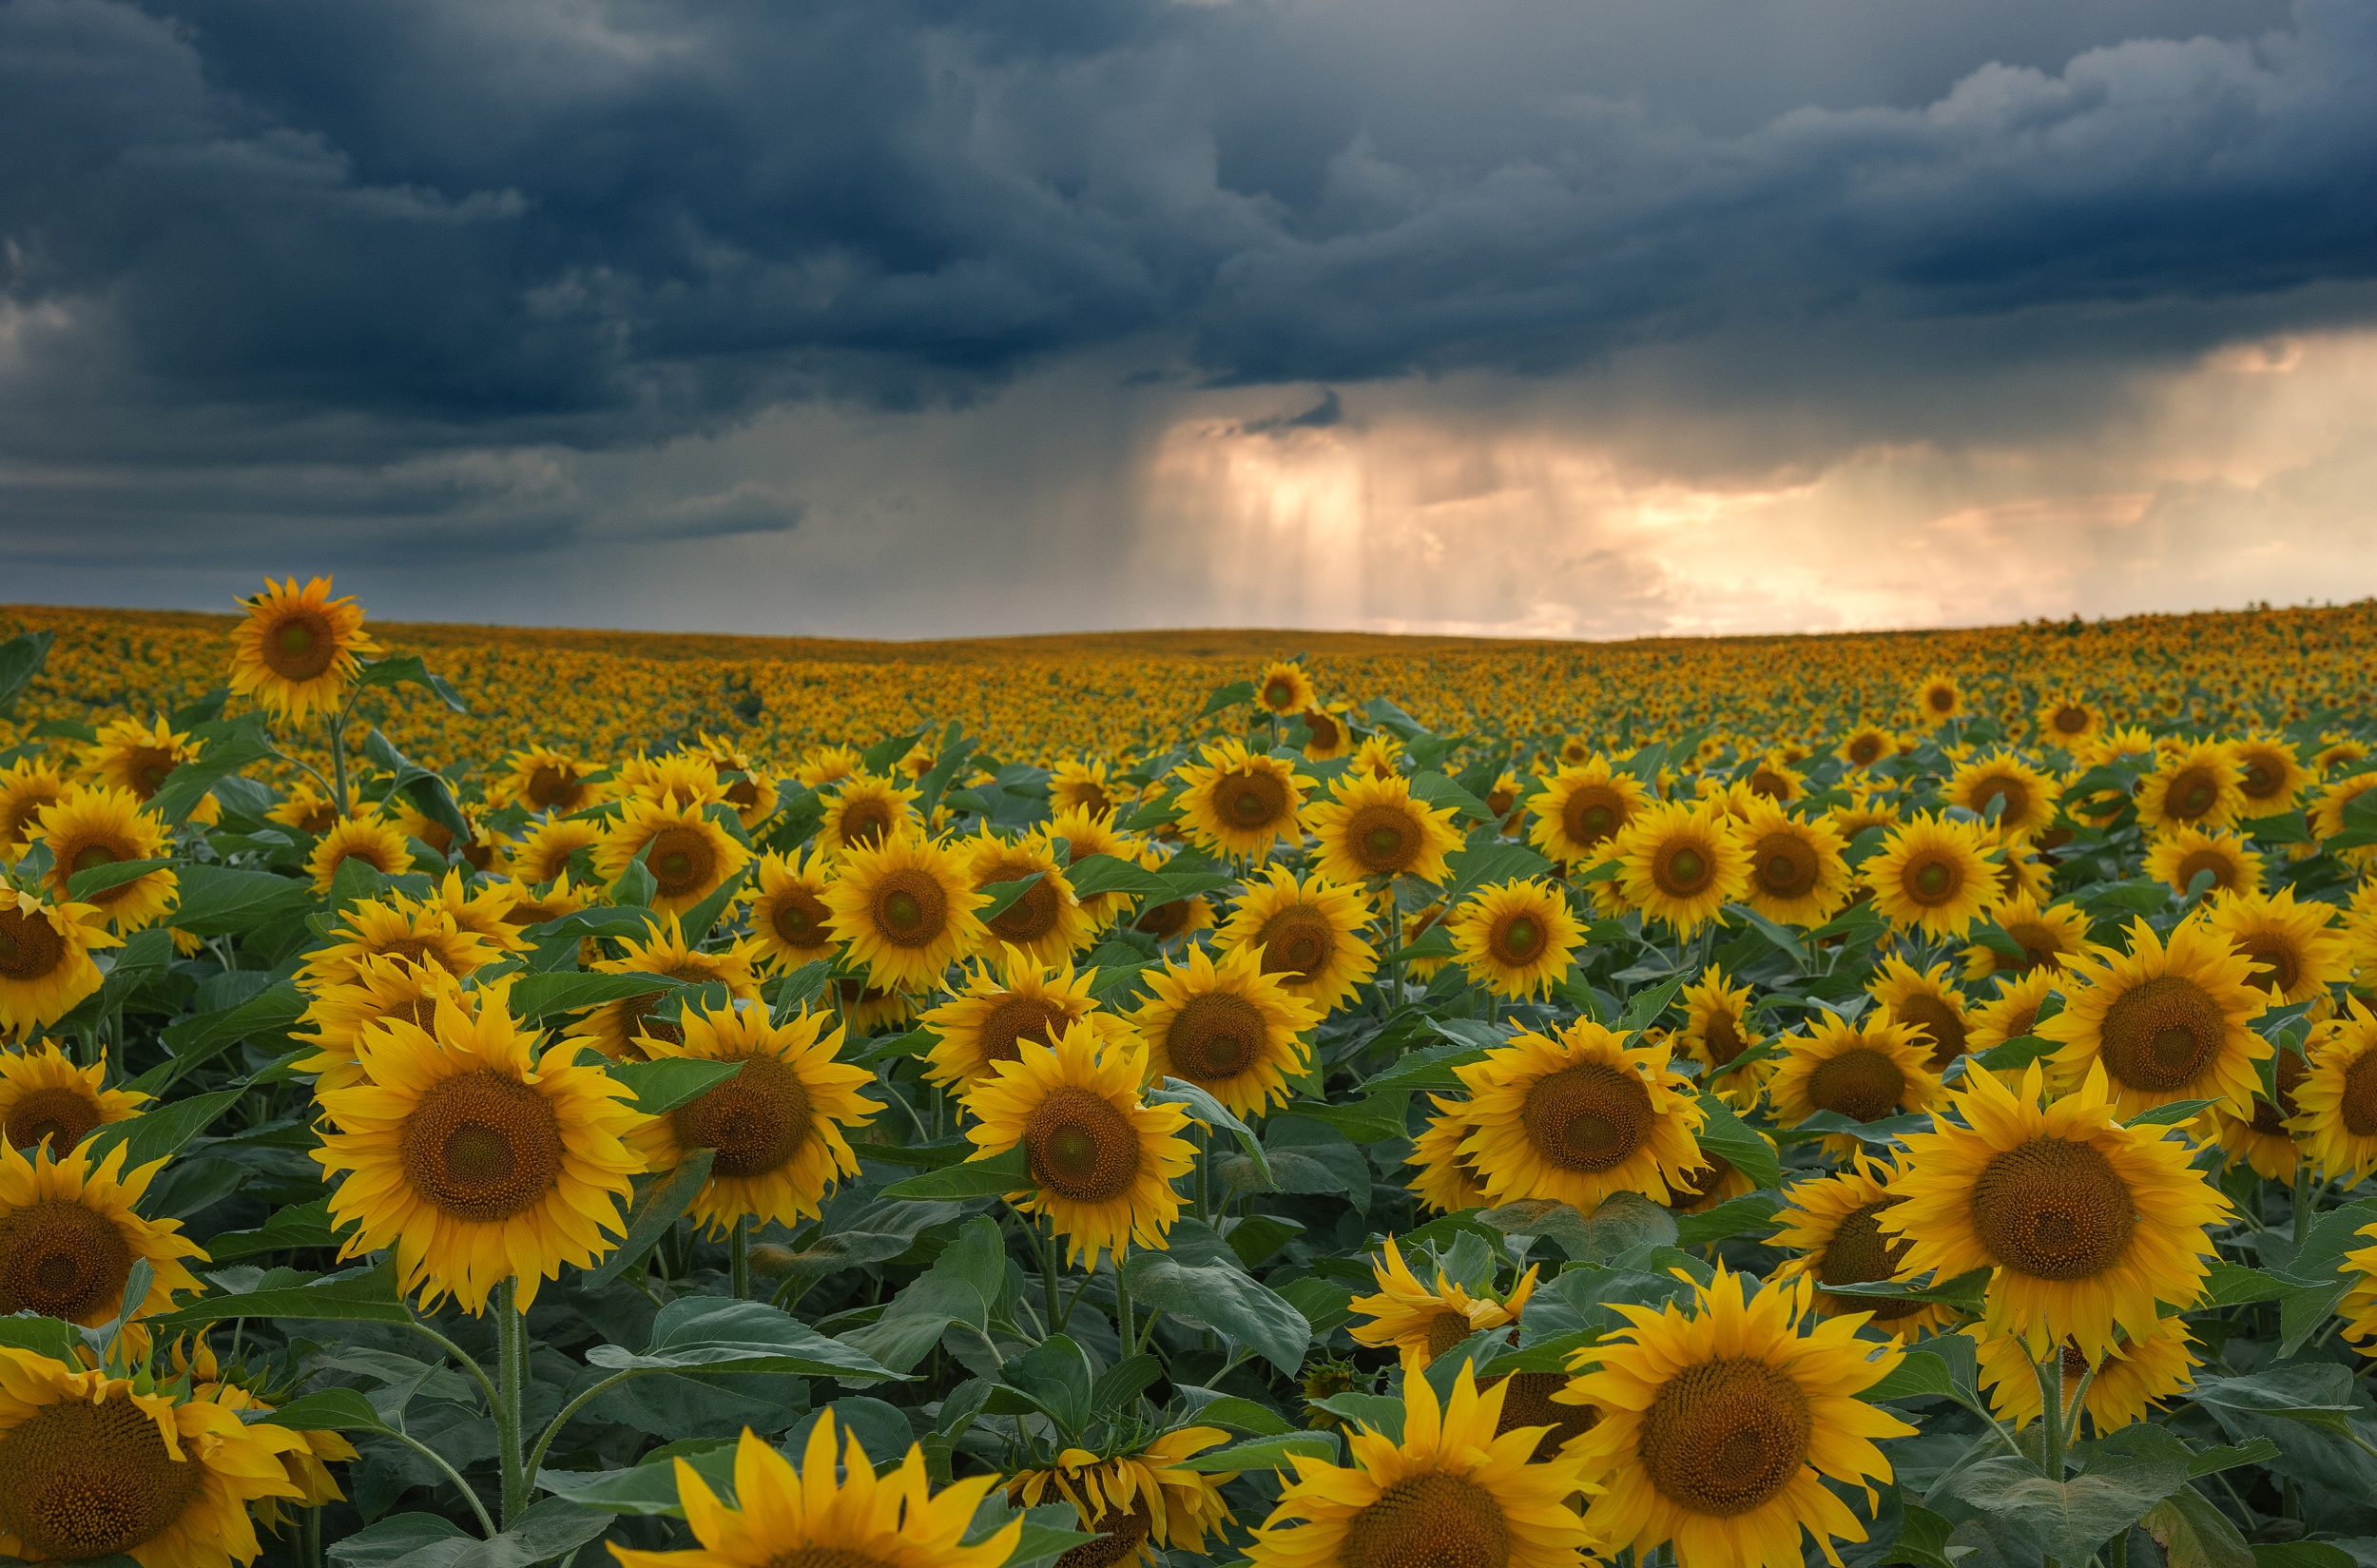 Earth Sunflower HD Wallpaper | Background Image